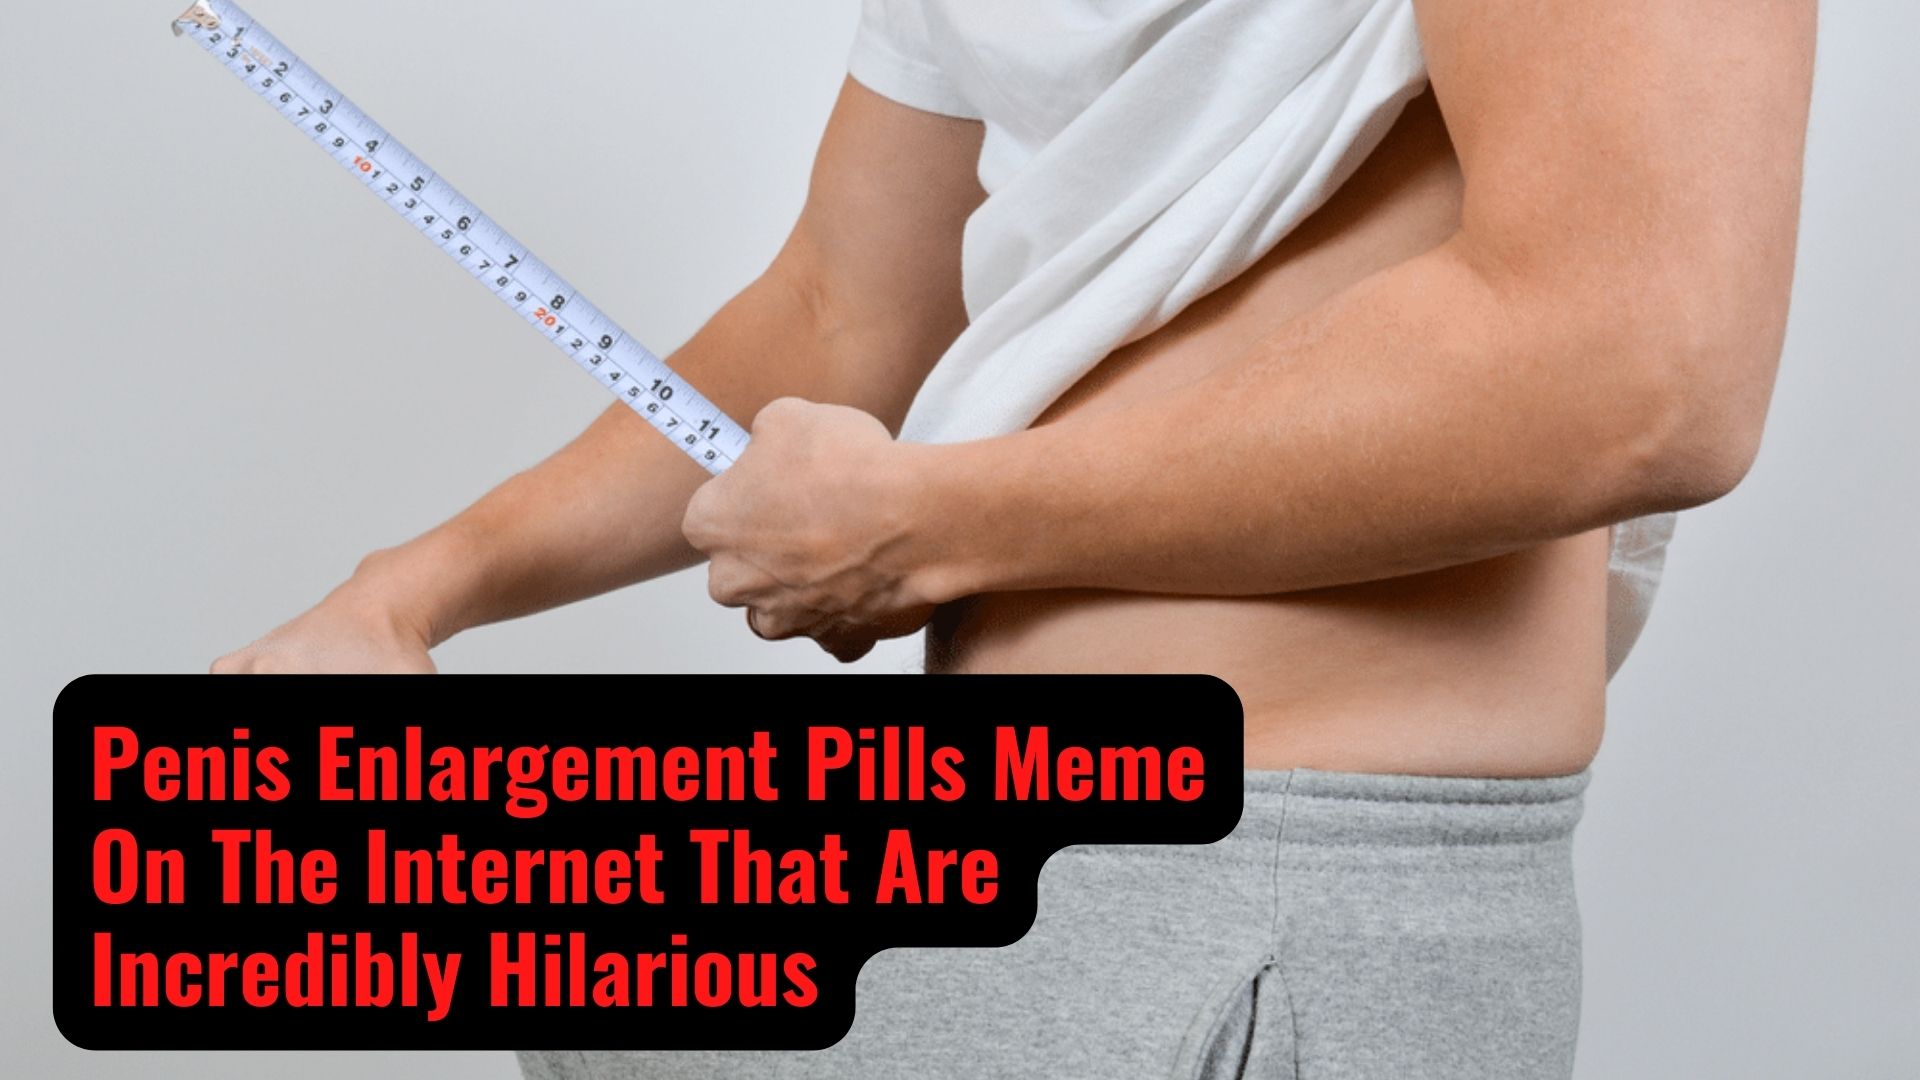 Penis Enlargement Pills Meme On The Internet That Are Incredibly Hilarious